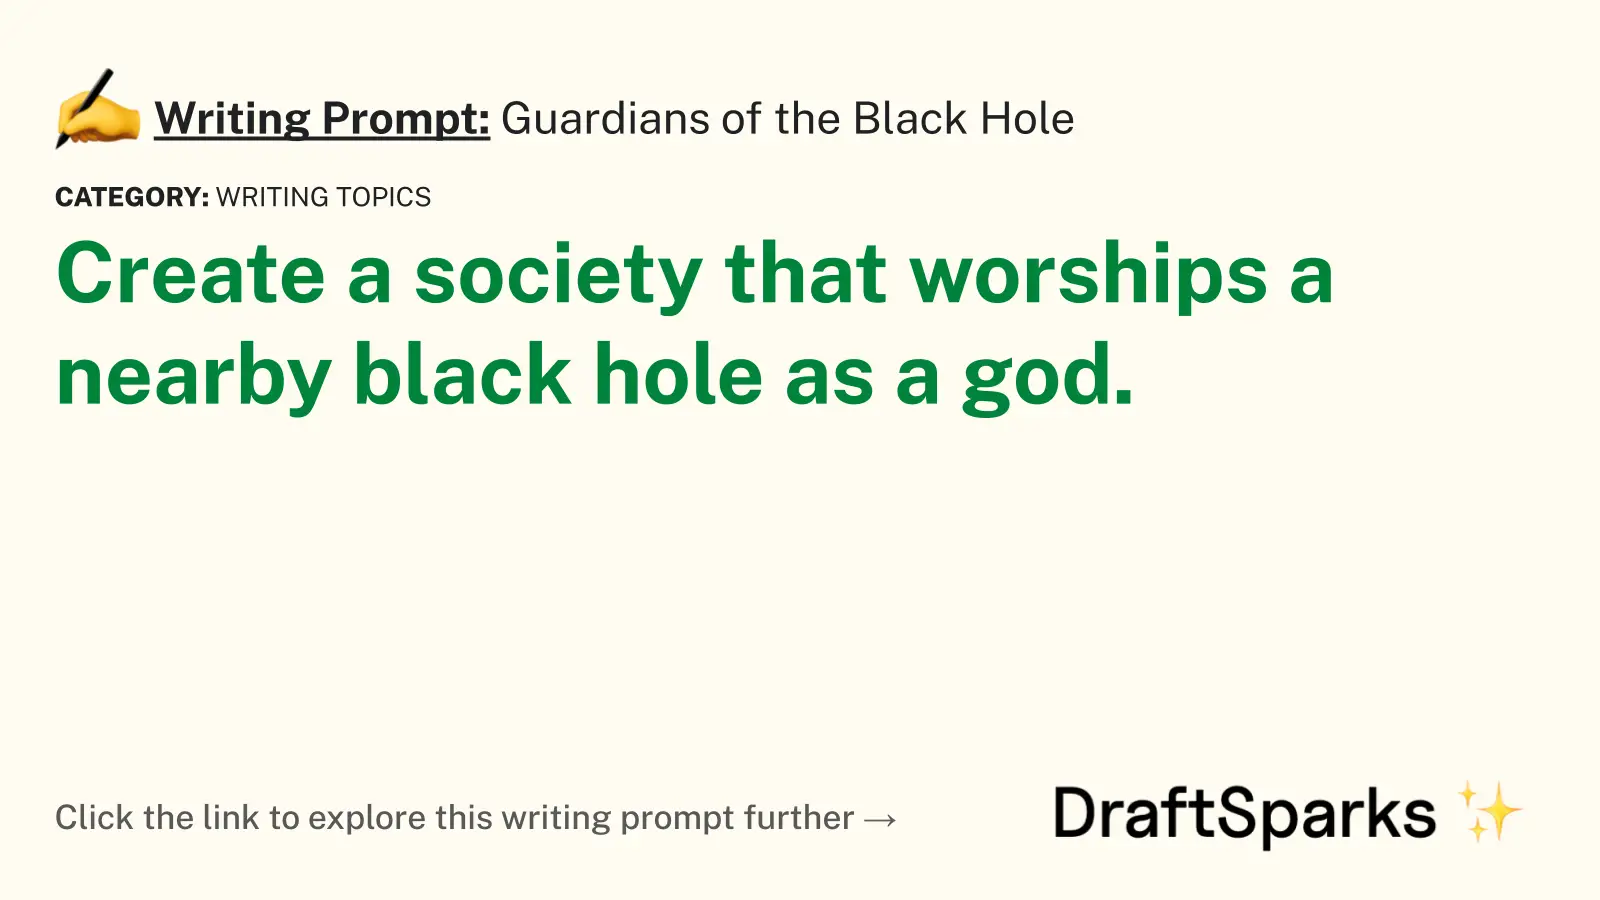 Guardians of the Black Hole